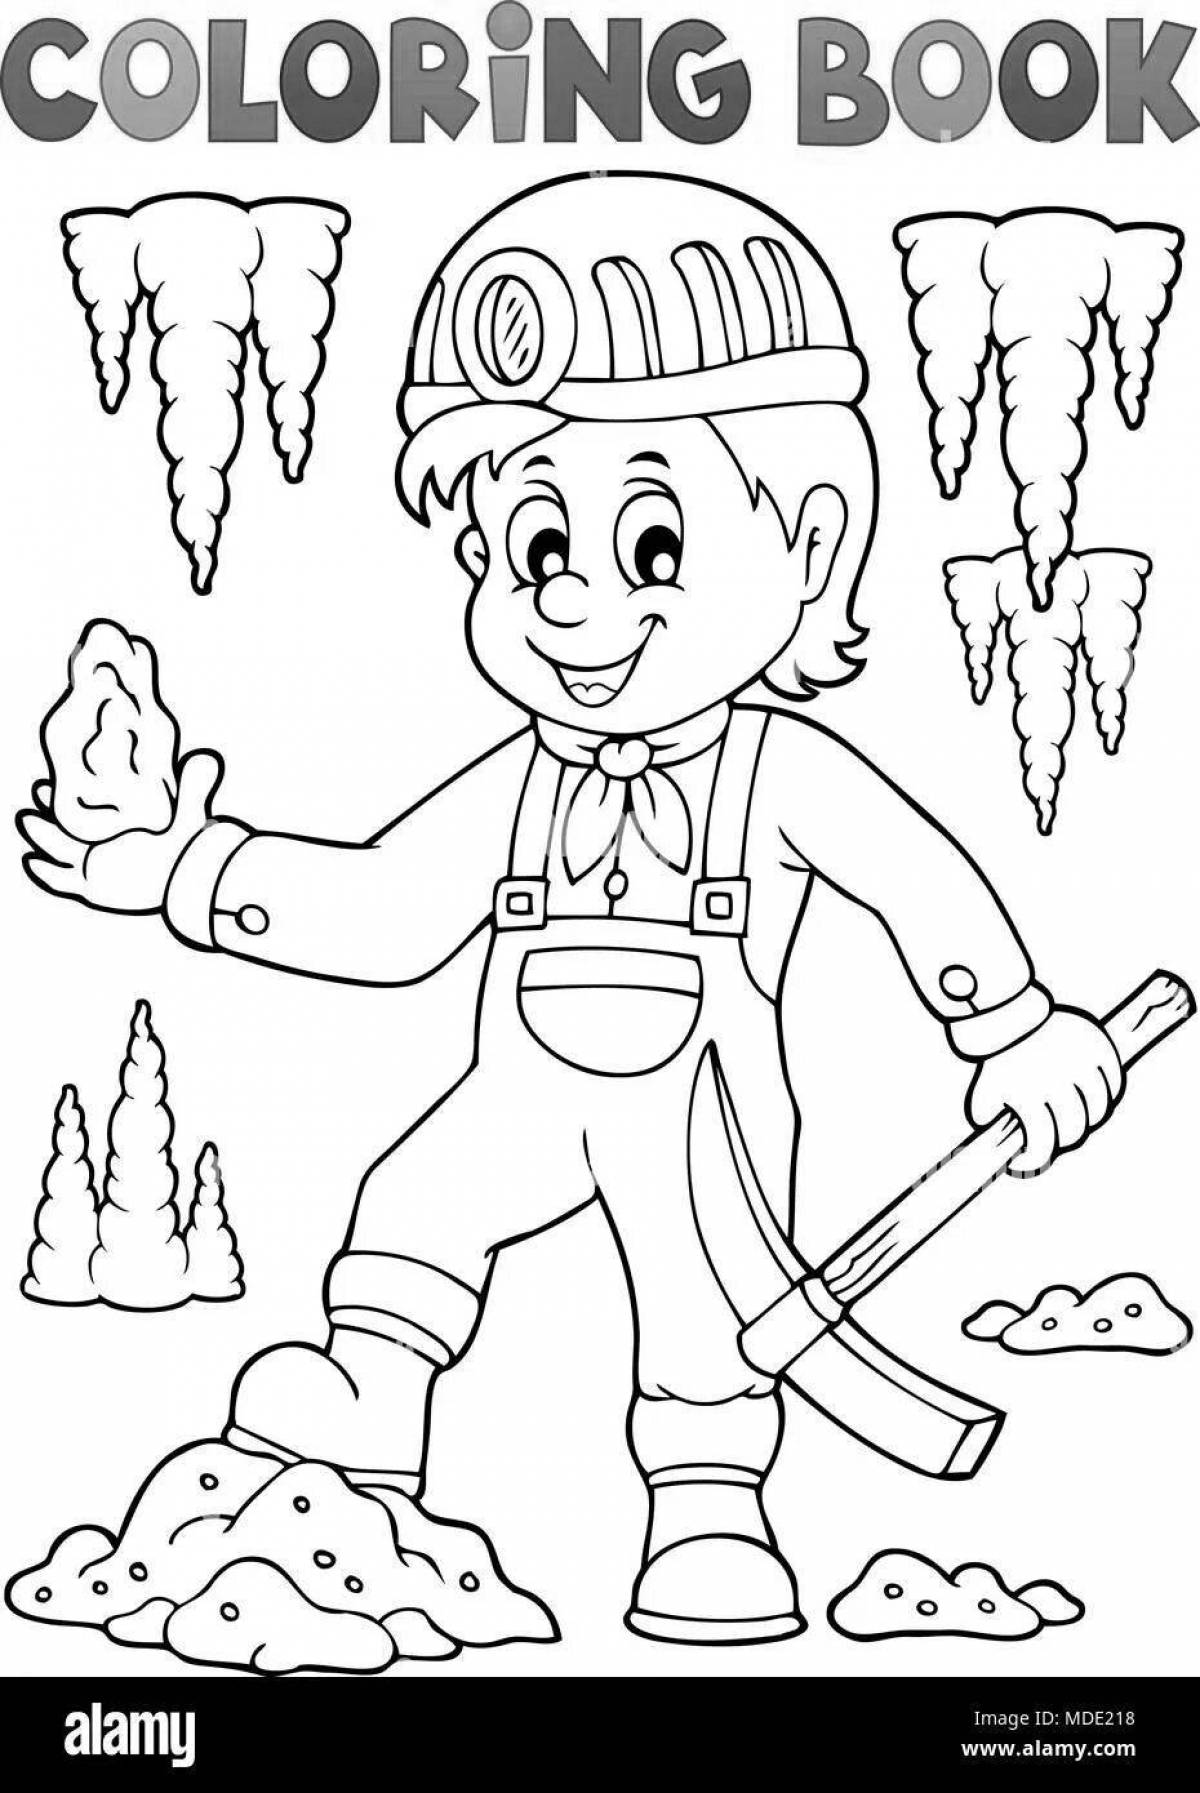 Adorable miner coloring book for kids